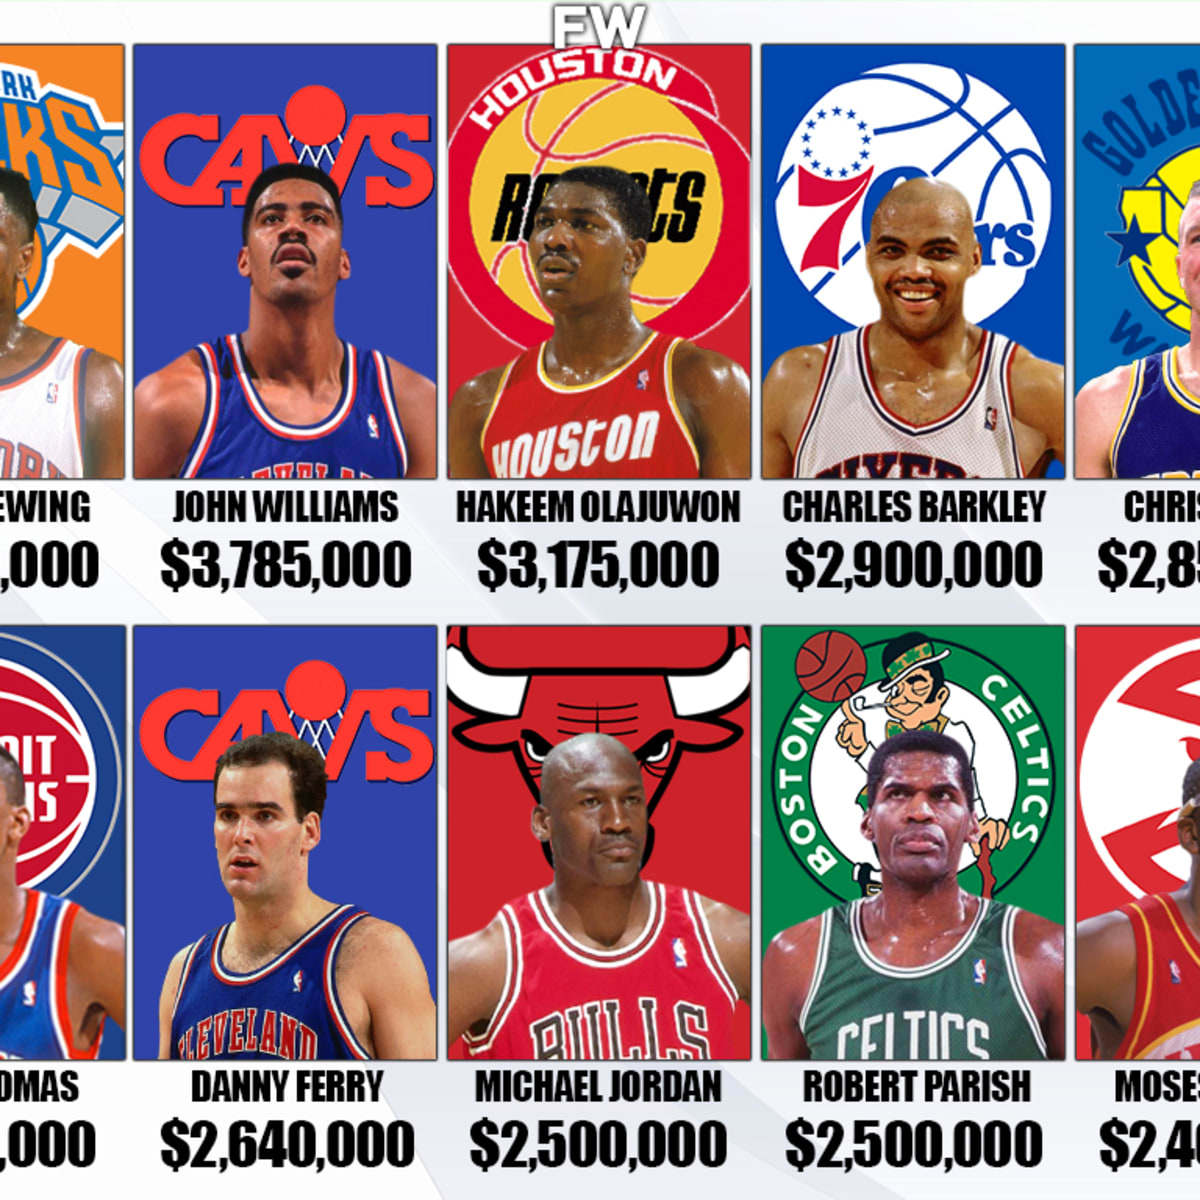 The highest paid players during the 1990-1991 NBA season might surprise you  - Basketball Network - Your daily dose of basketball